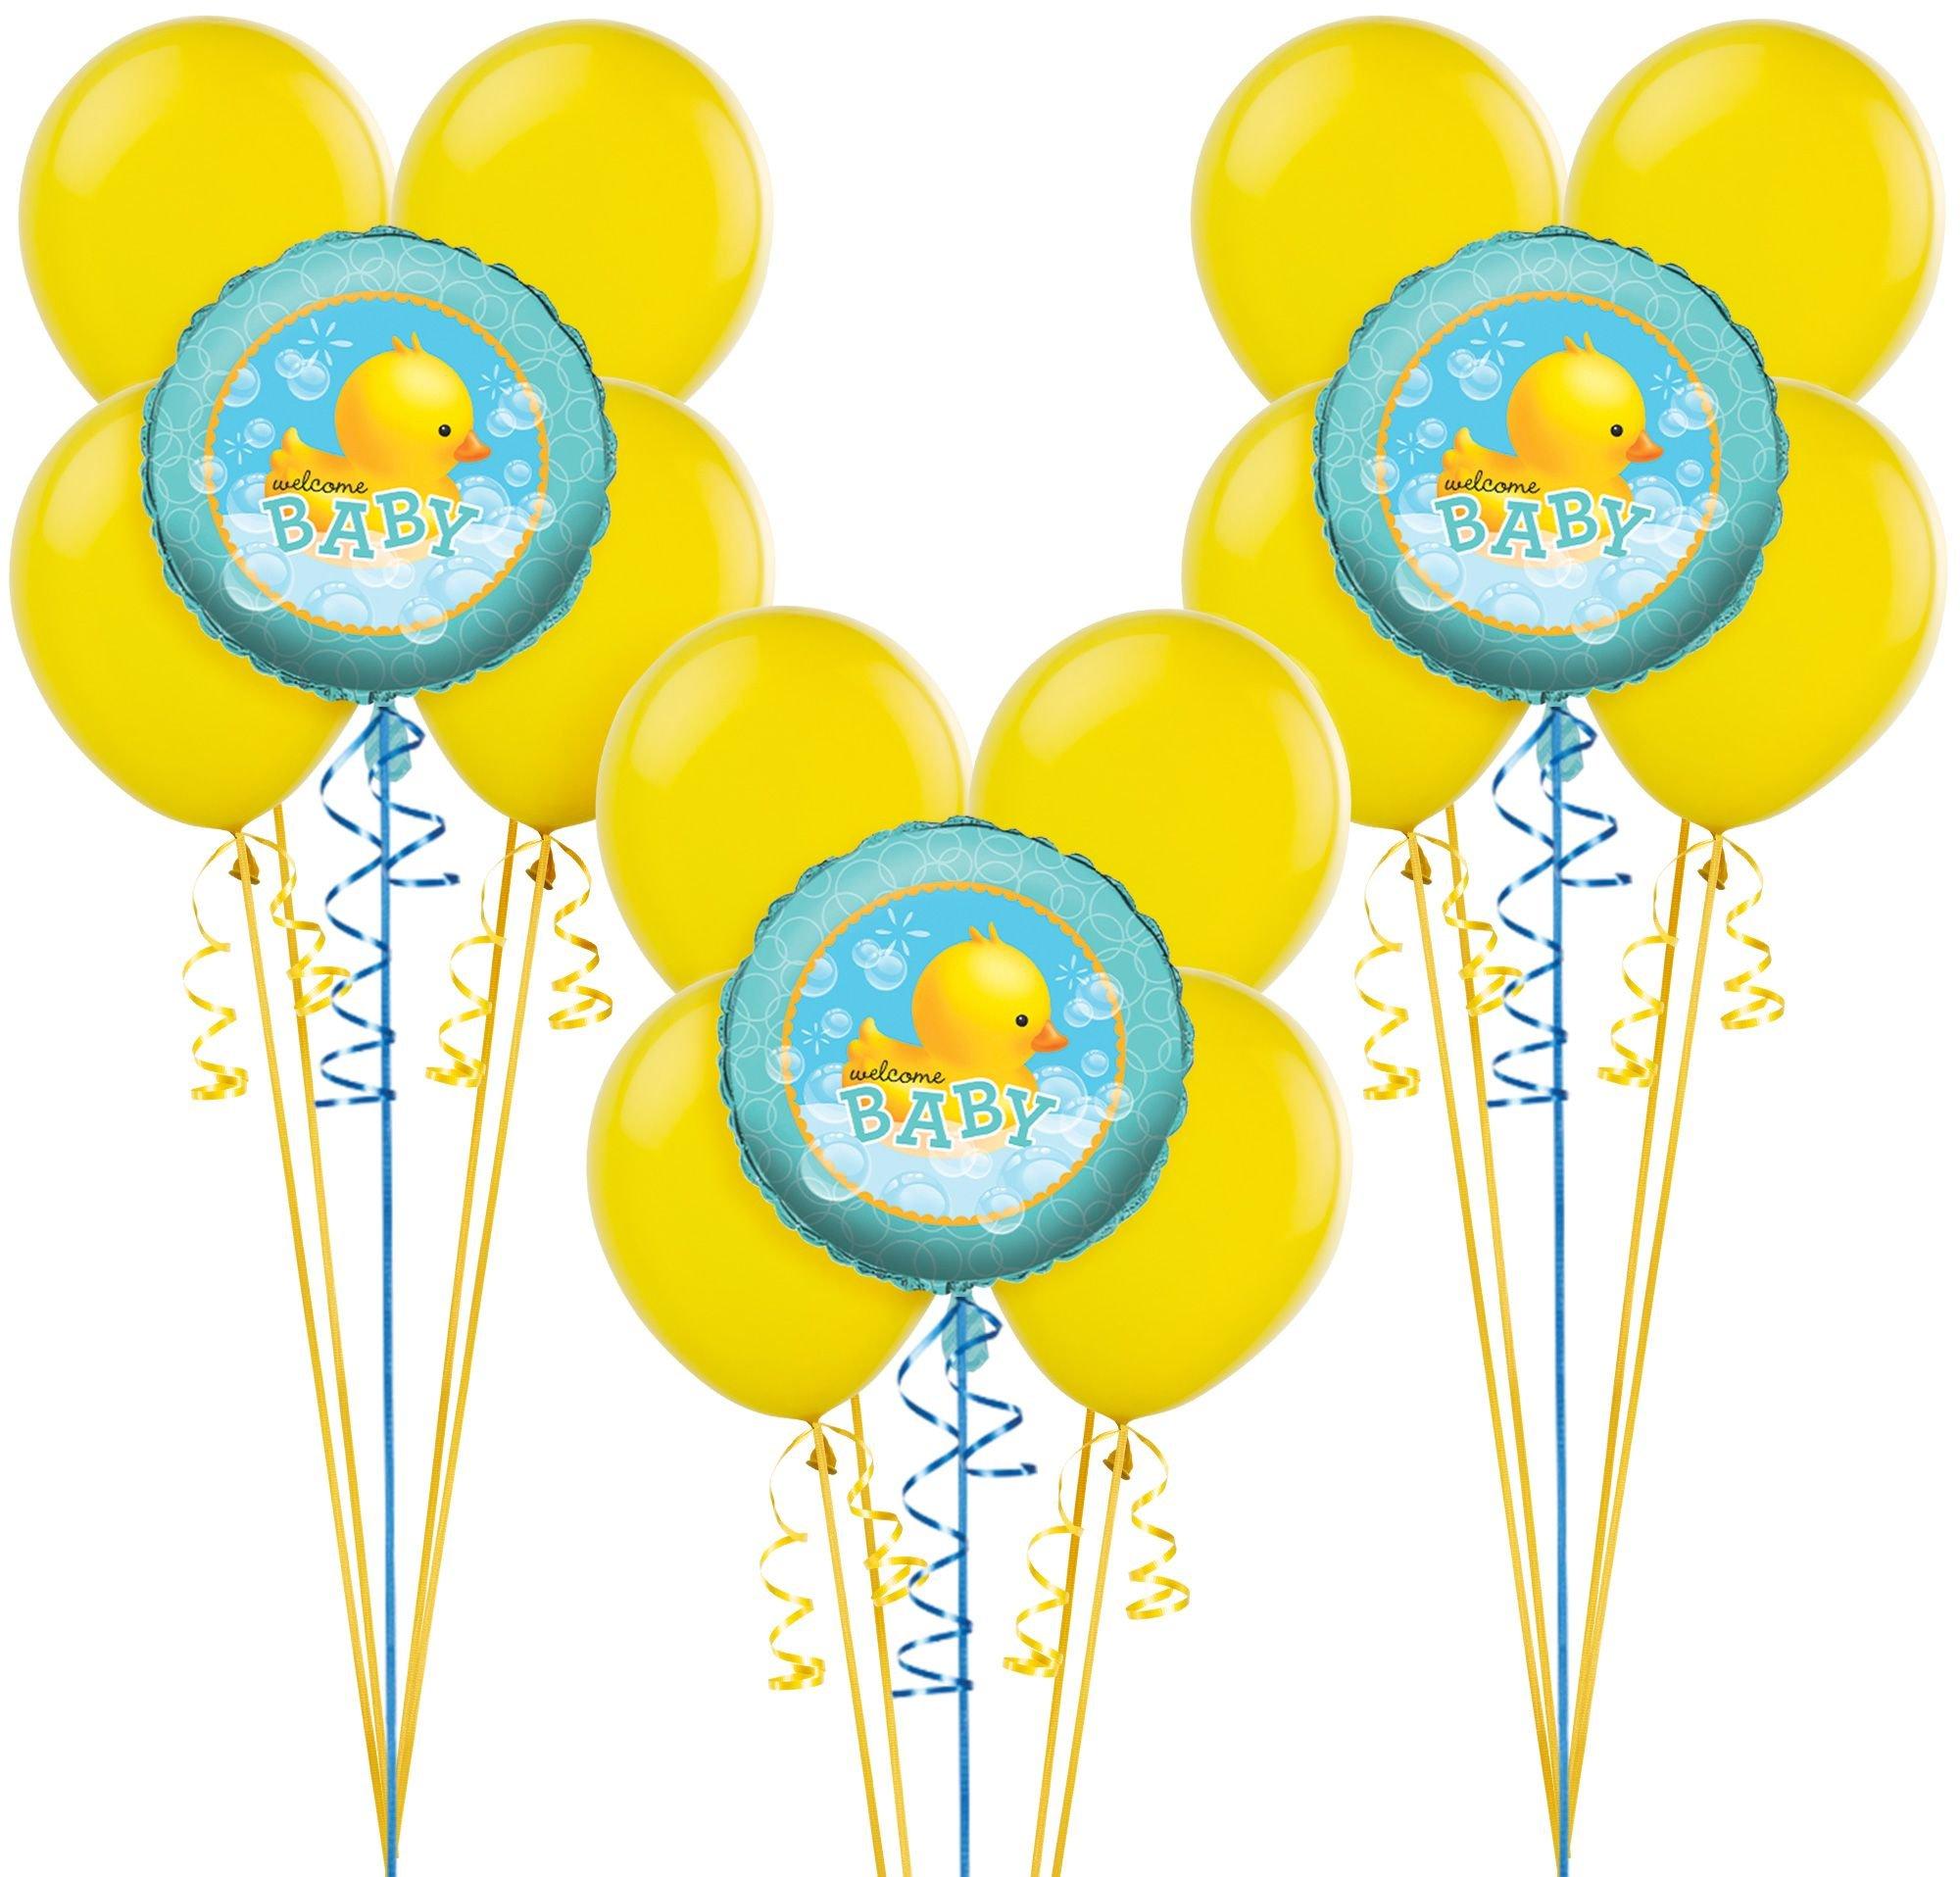 Bubble Bath Baby Shower Balloon Kit 15ct | Party City